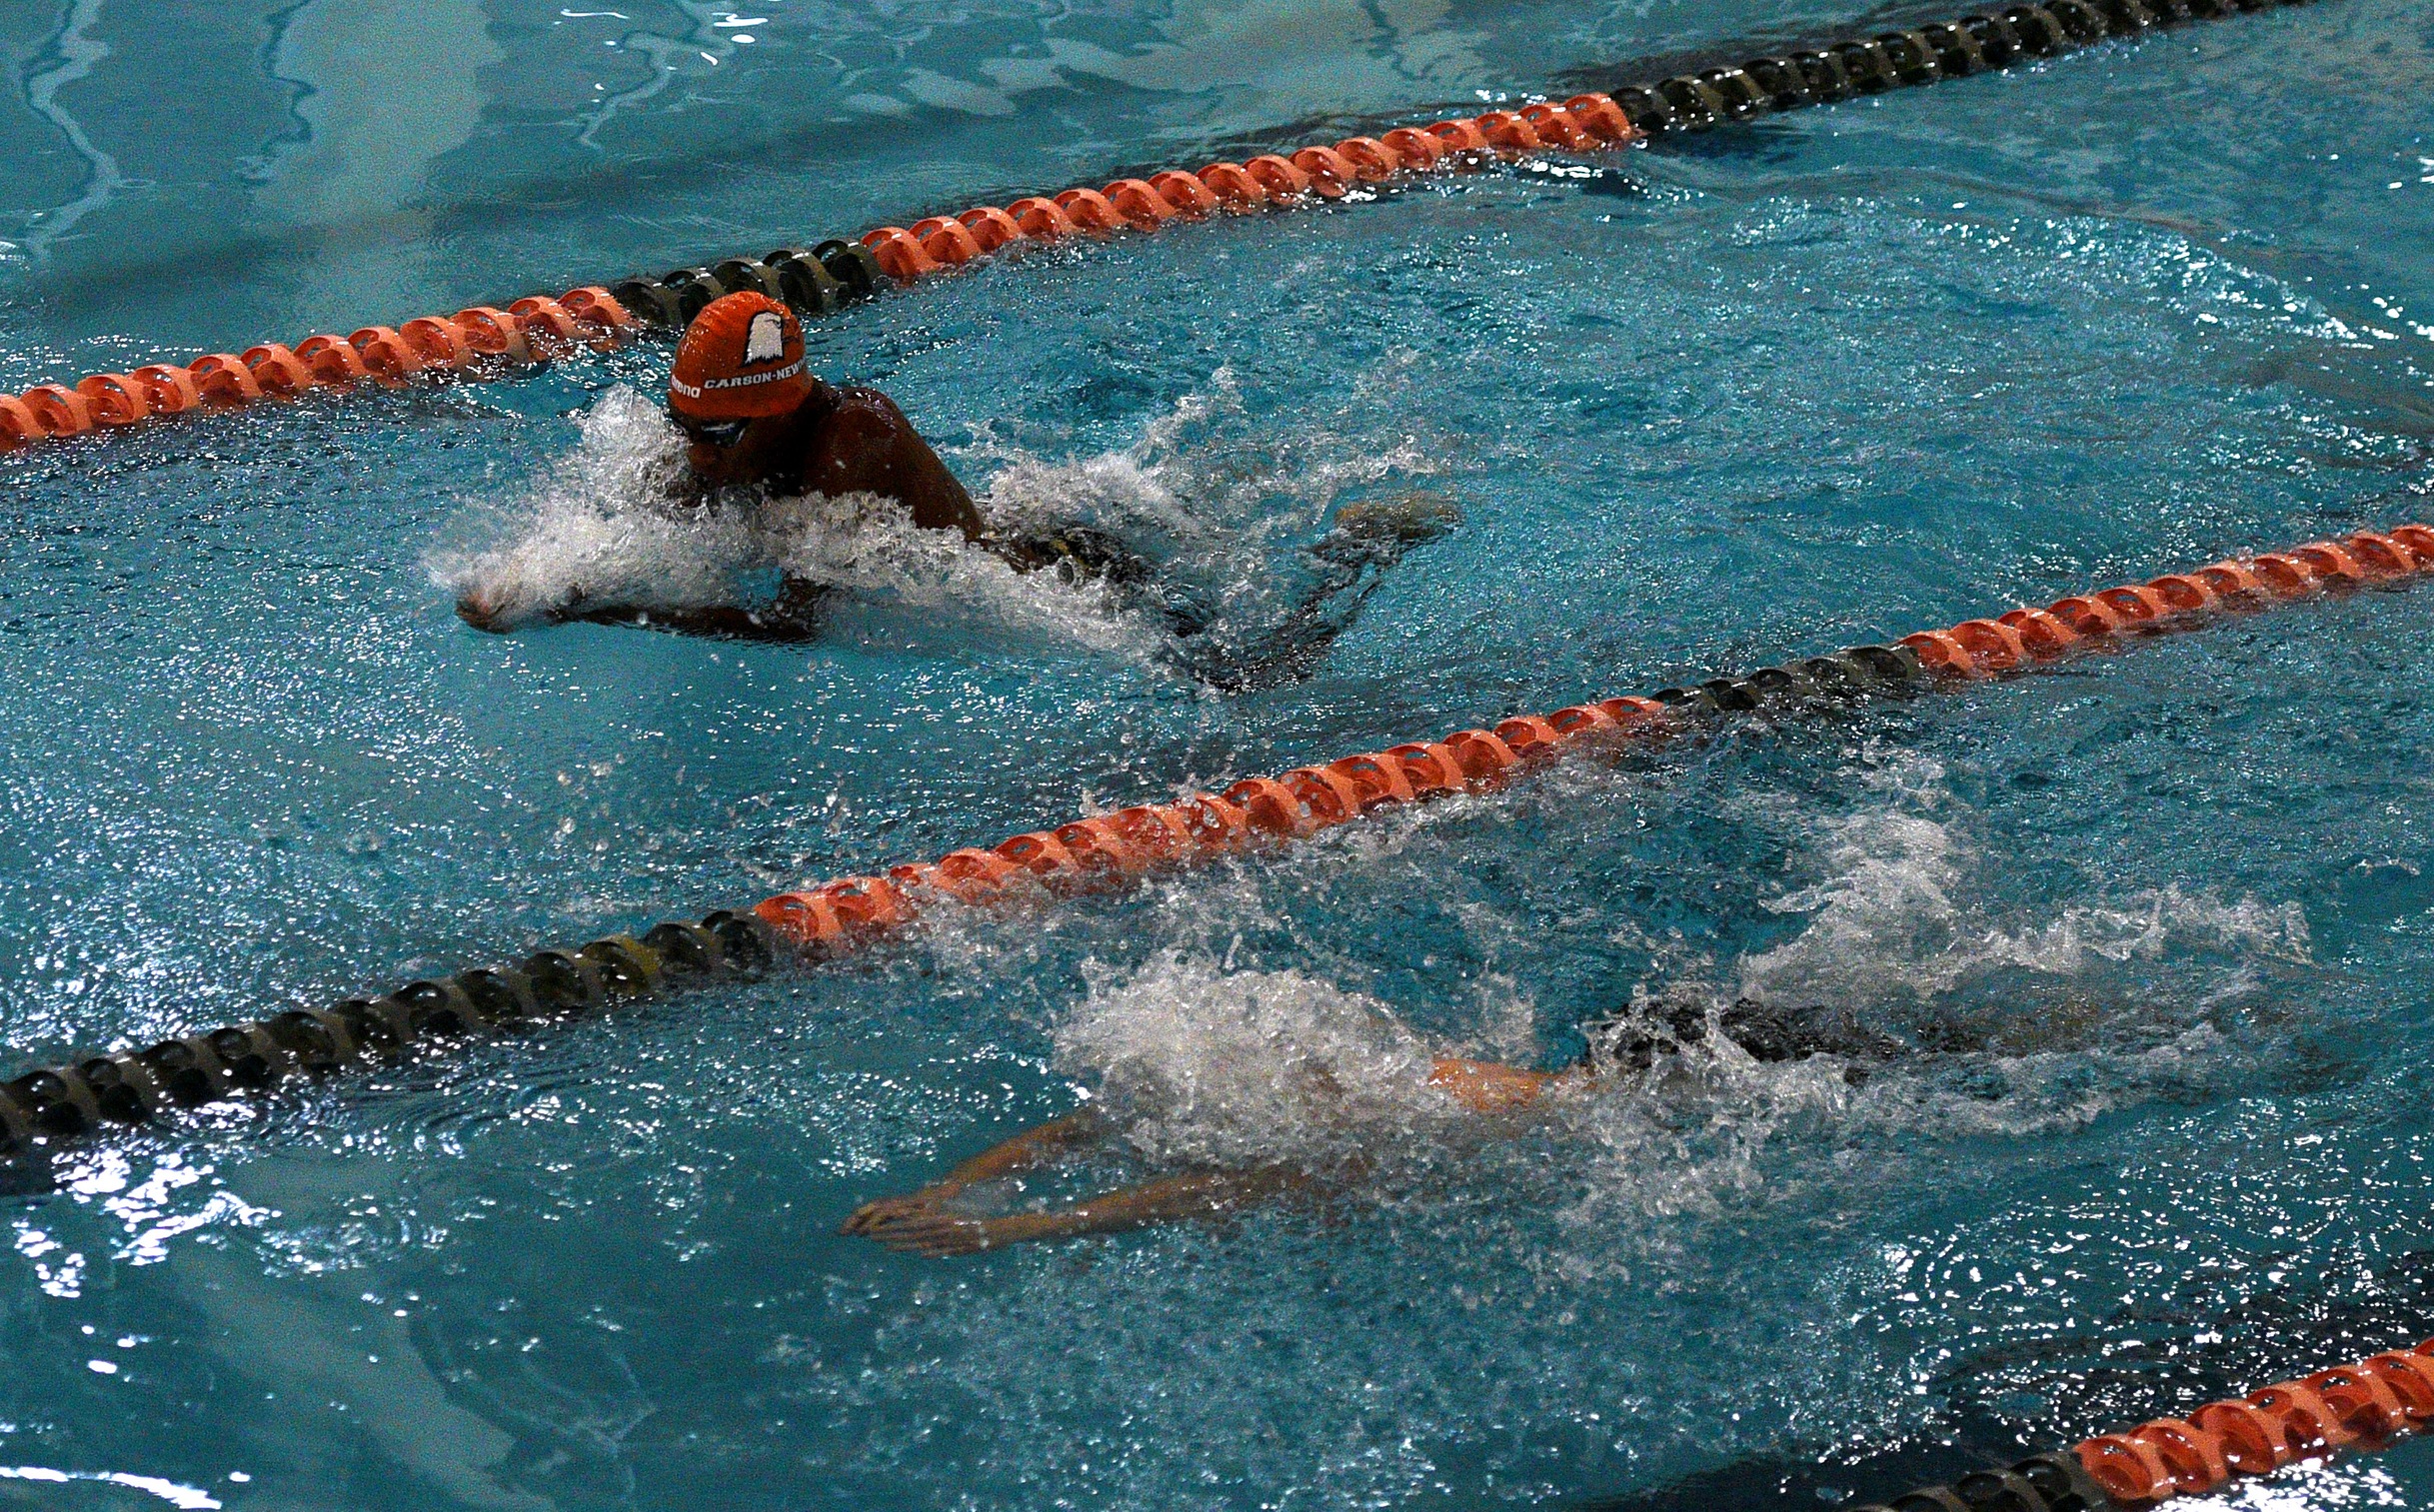 Pacheco paces Eagles in day two of BMC Championships